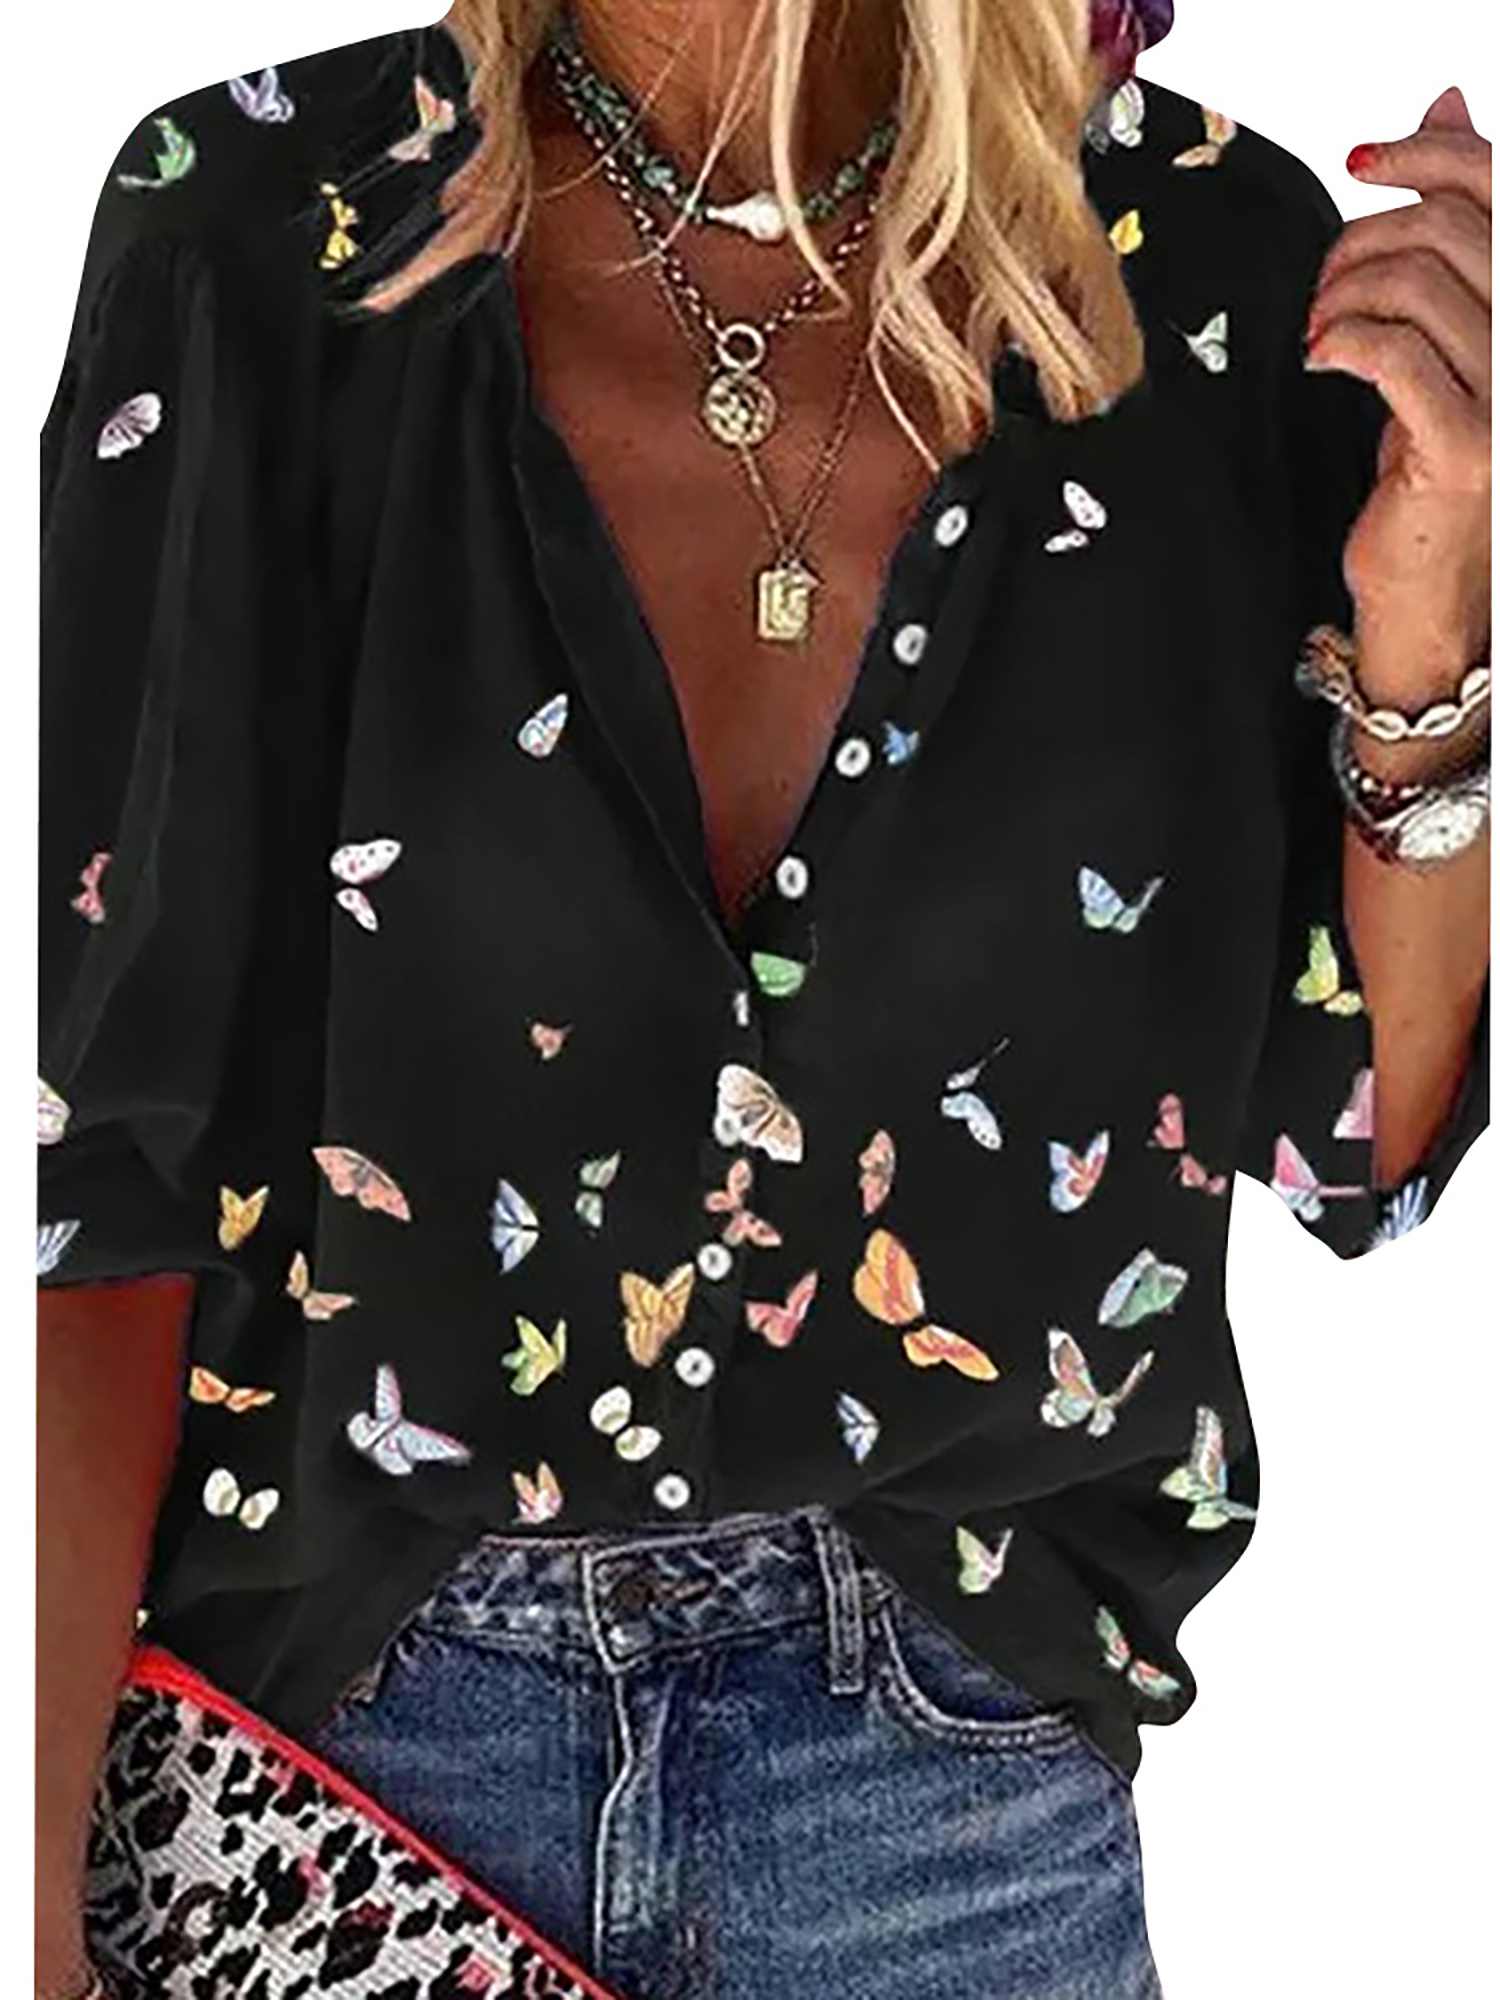 Womens Summer Tops Casual 3//4 Sleeve Blouses Loose V Neck T Shirts Ladies Fashion Butterfly Print Tunic Tops